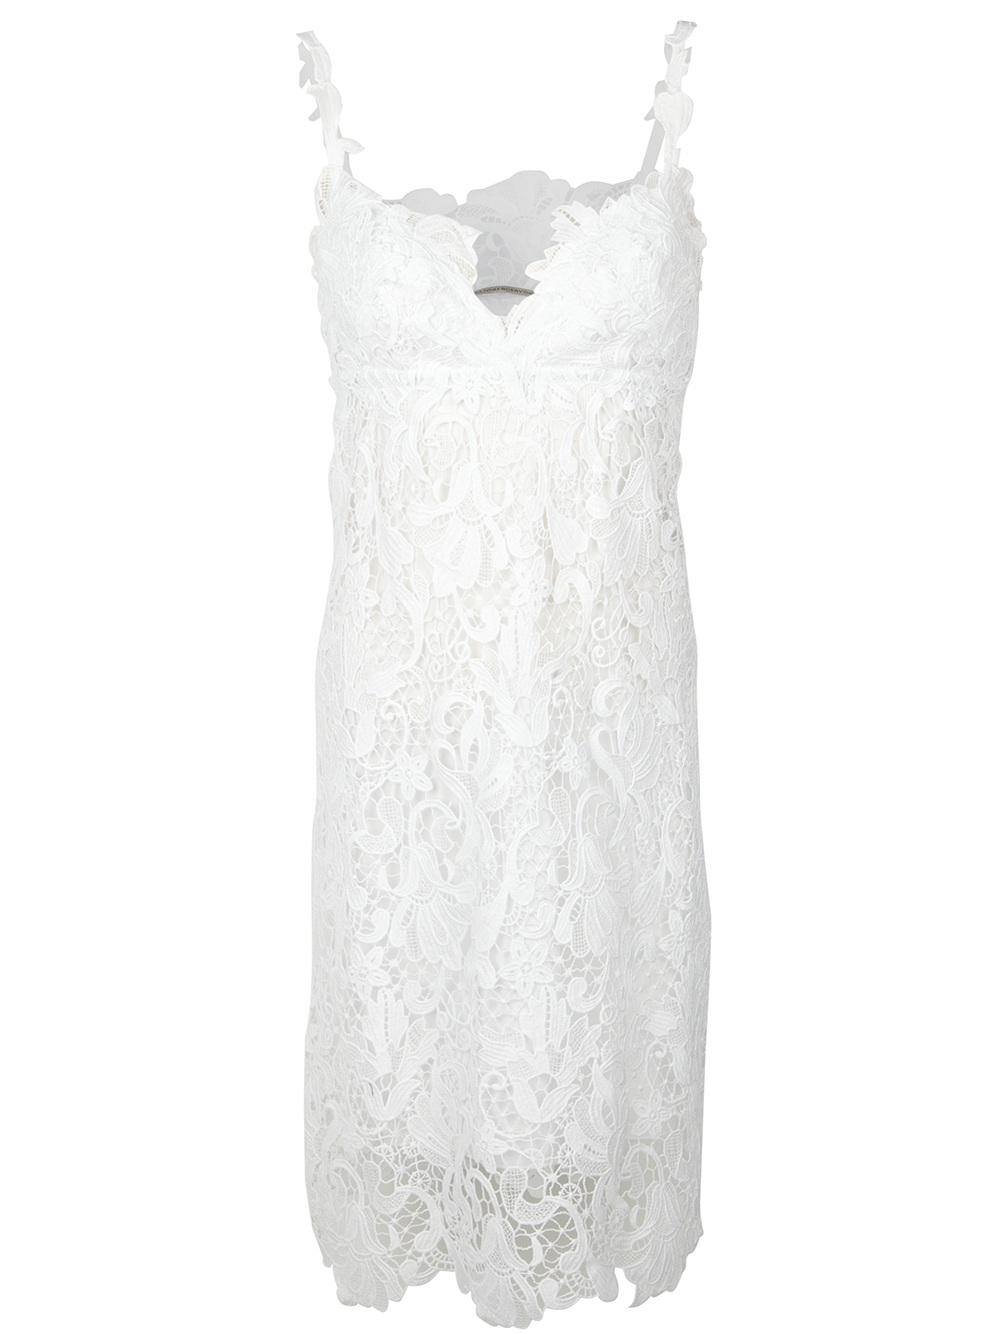 Ermanno Scervino Lace Overlay On Side in White - Lyst